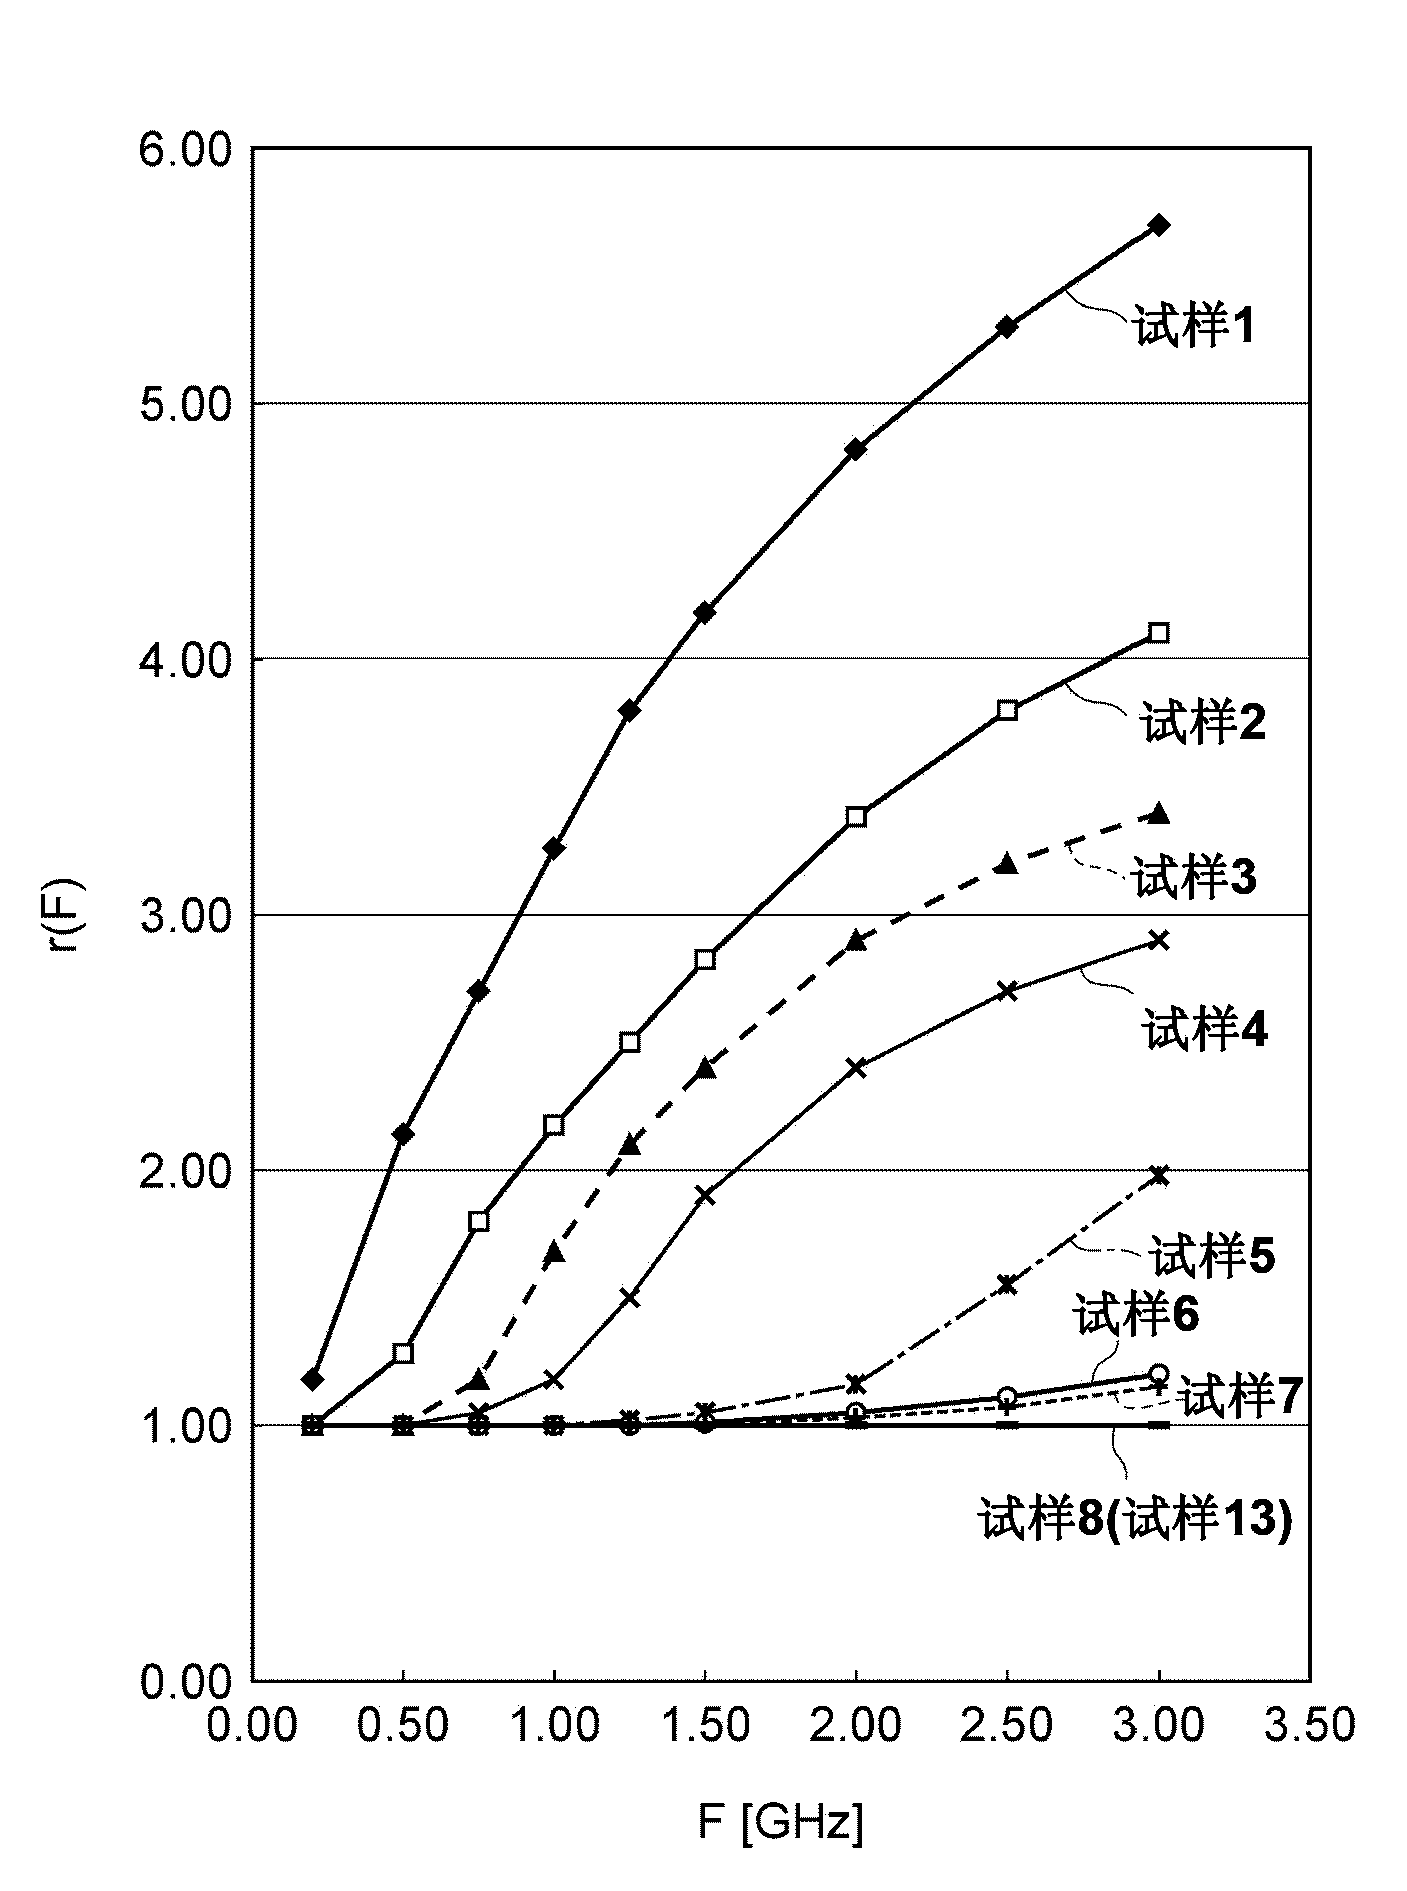 High-frequency transmission line, antenna, and electronic circuit board